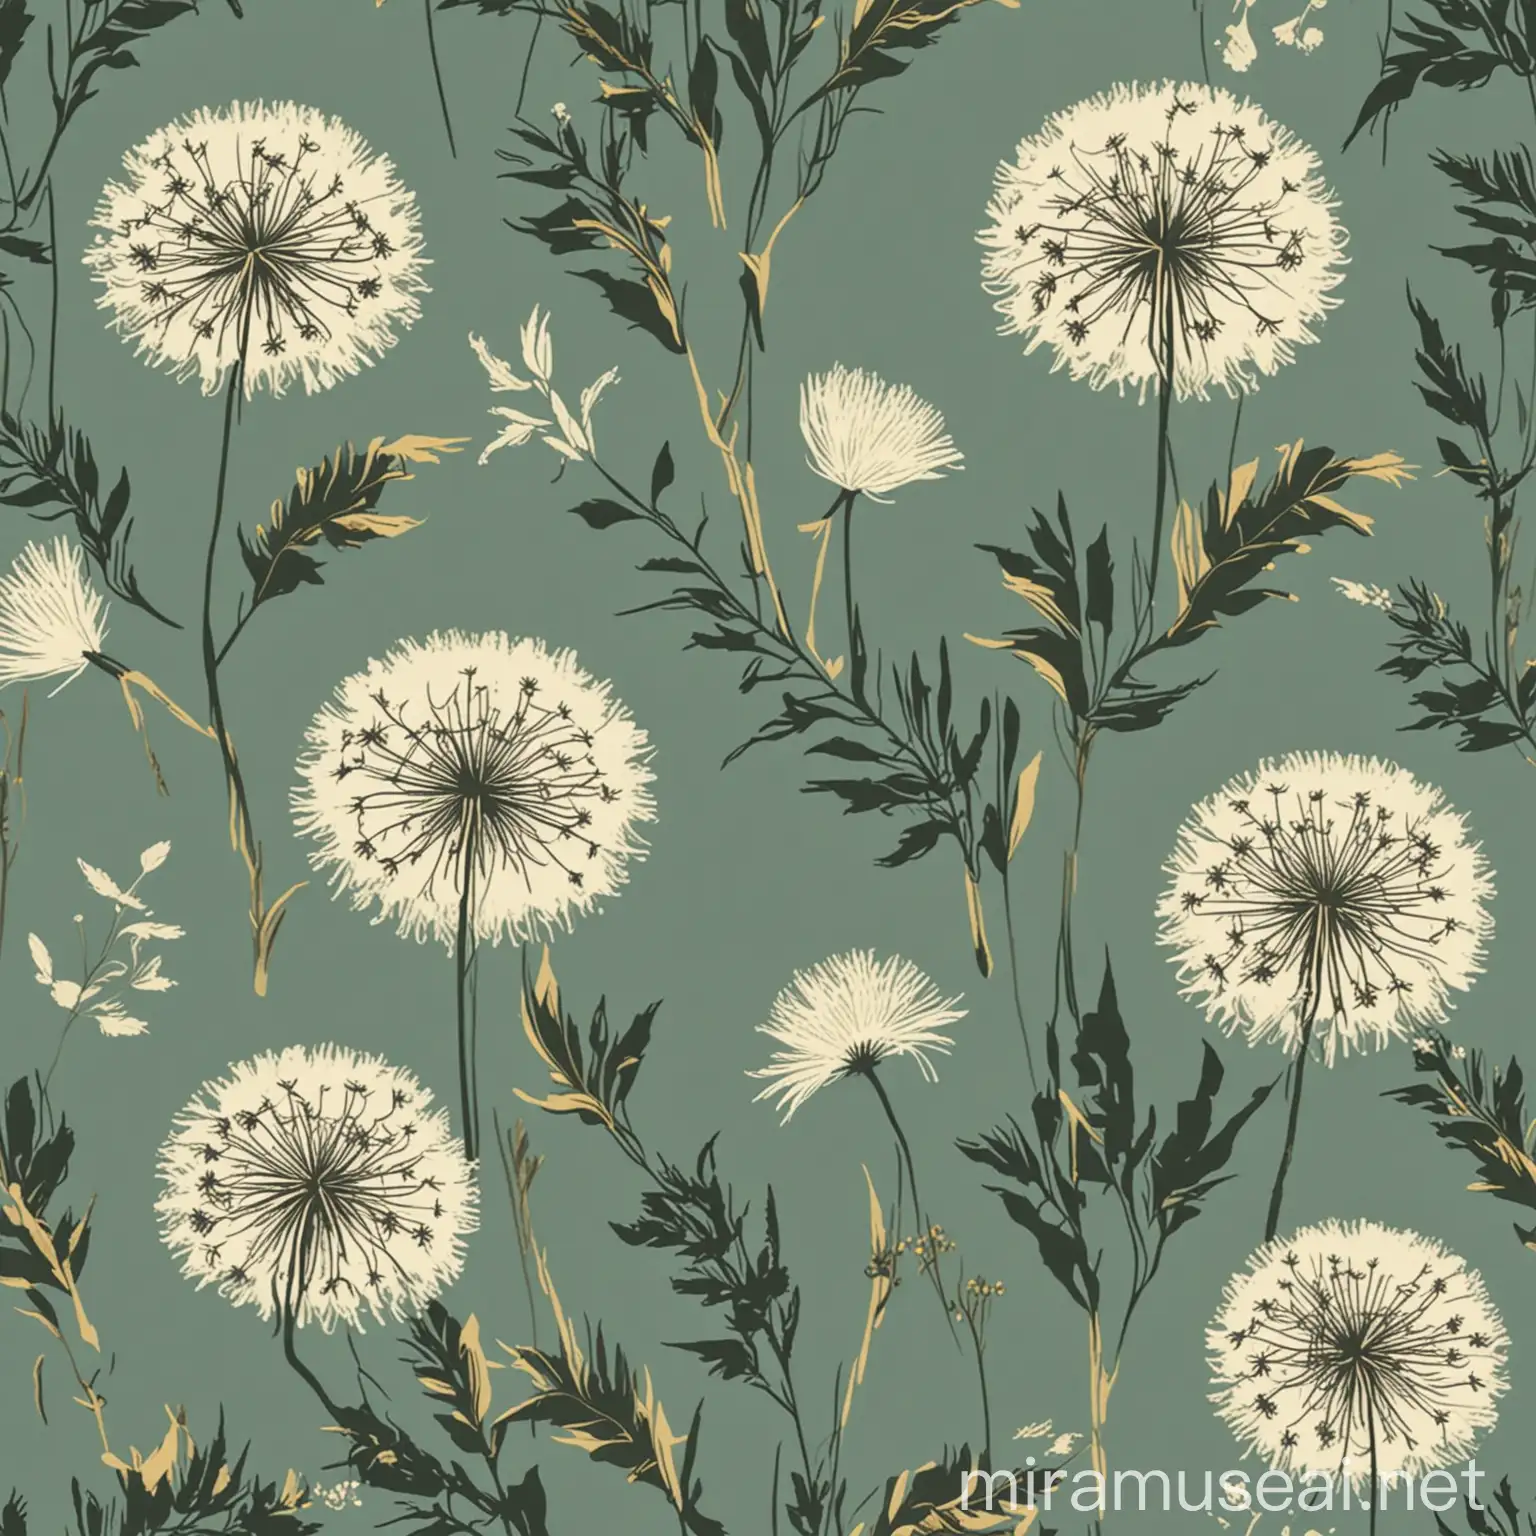 modern inlustration, small flowers, flowers and leaves, dandelion, weed, simple pattern, inlustration seamless pattern, minimalist style, elegant colors, pillow design vector